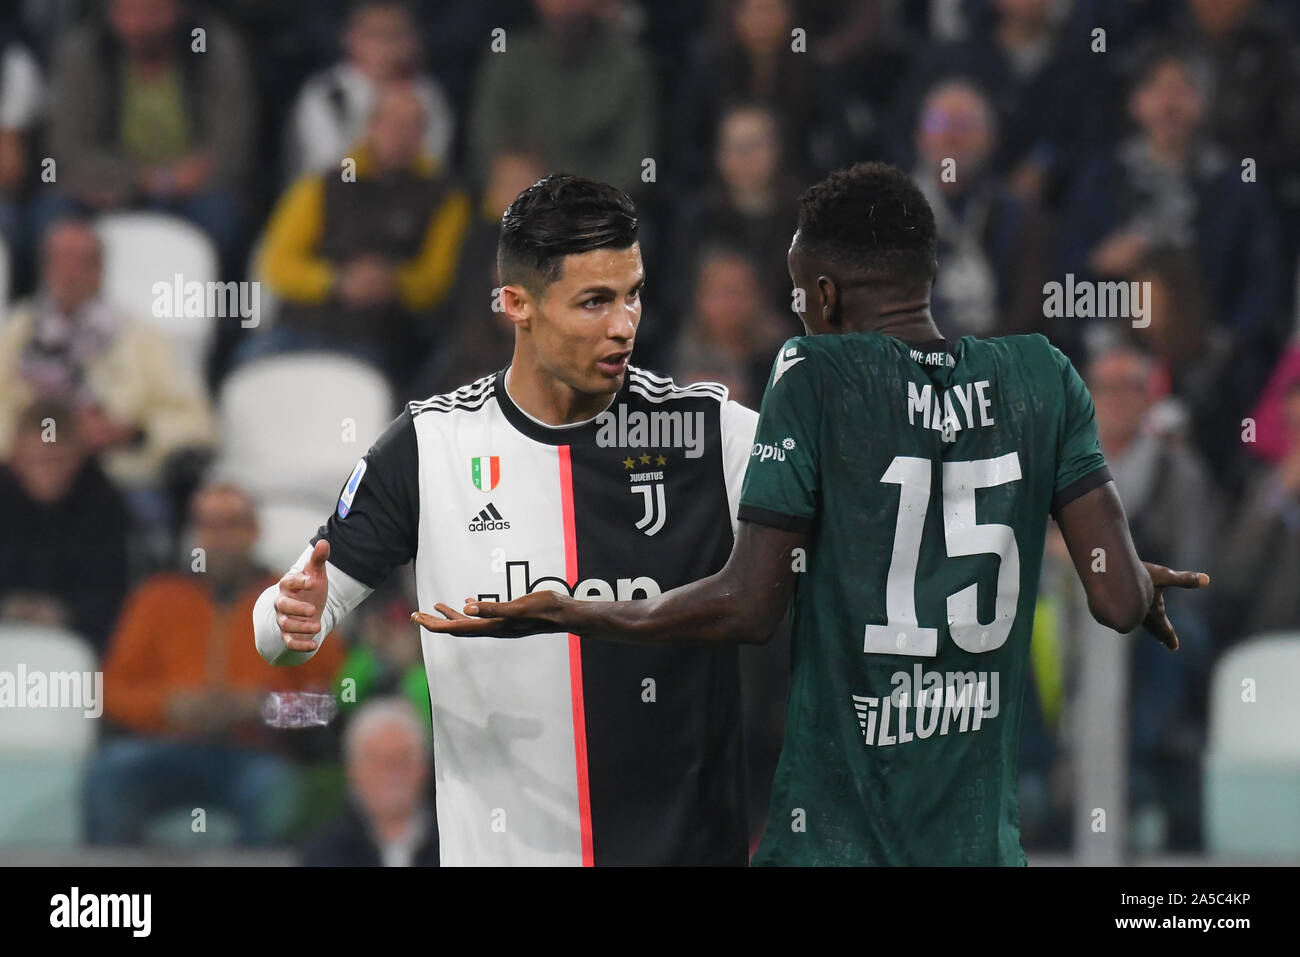 Ronaldo Serie A High Resolution Stock Photography and Images - Alamy